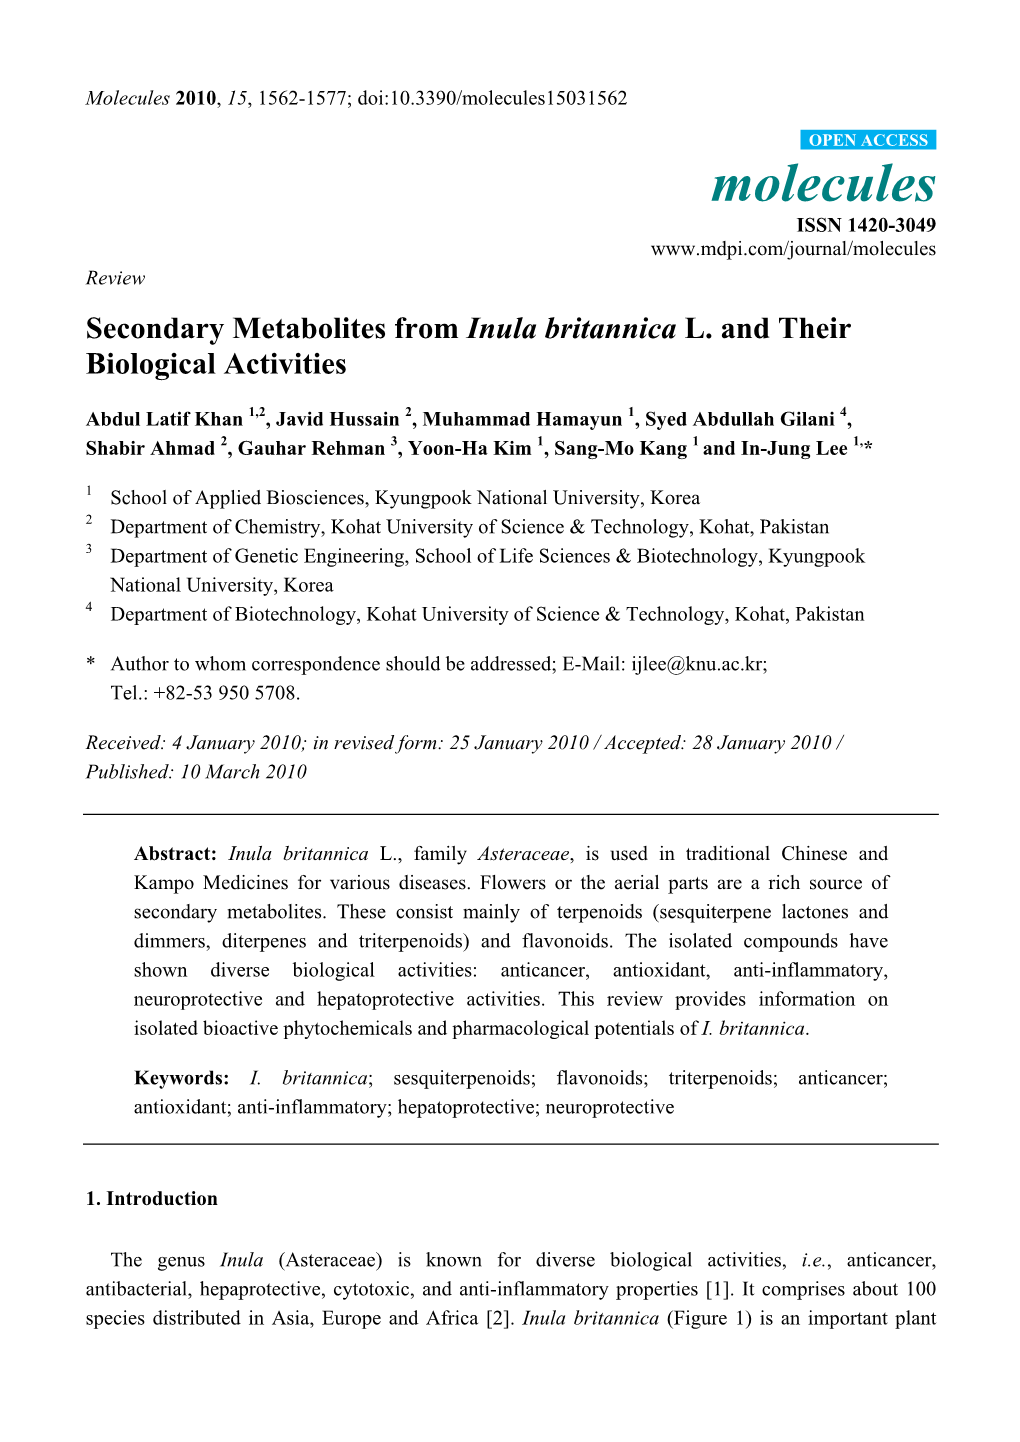 Secondary Metabolites from Inula Britannica L. and Their Biological Activities